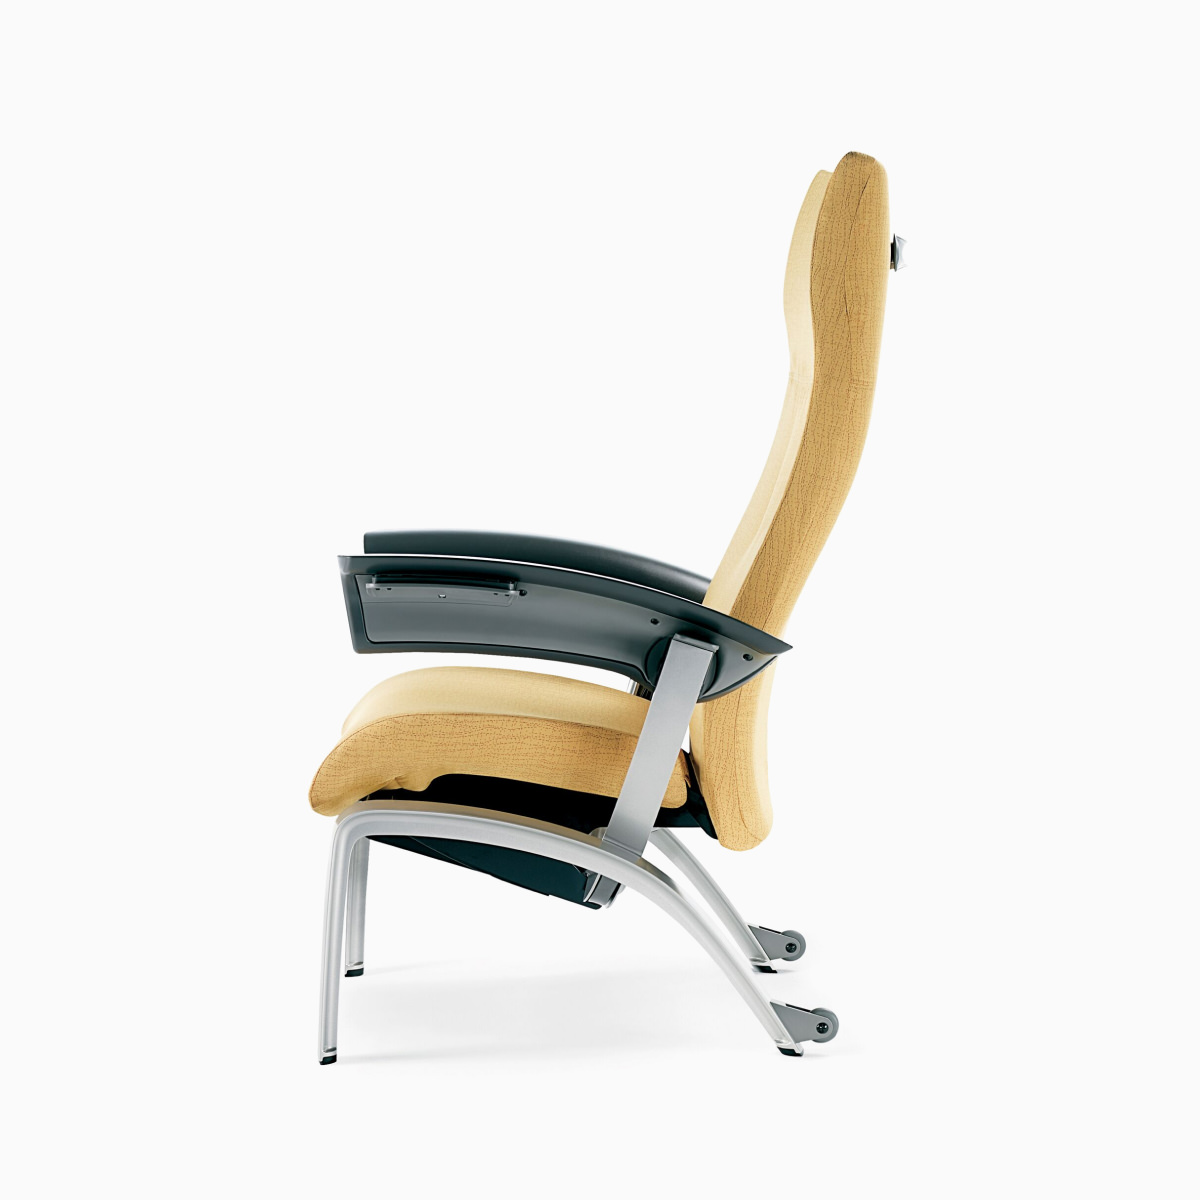 Nemschoff Nala Patient Chair in a yellow upholstery and dark gray arms viewed on white sweep from the side.